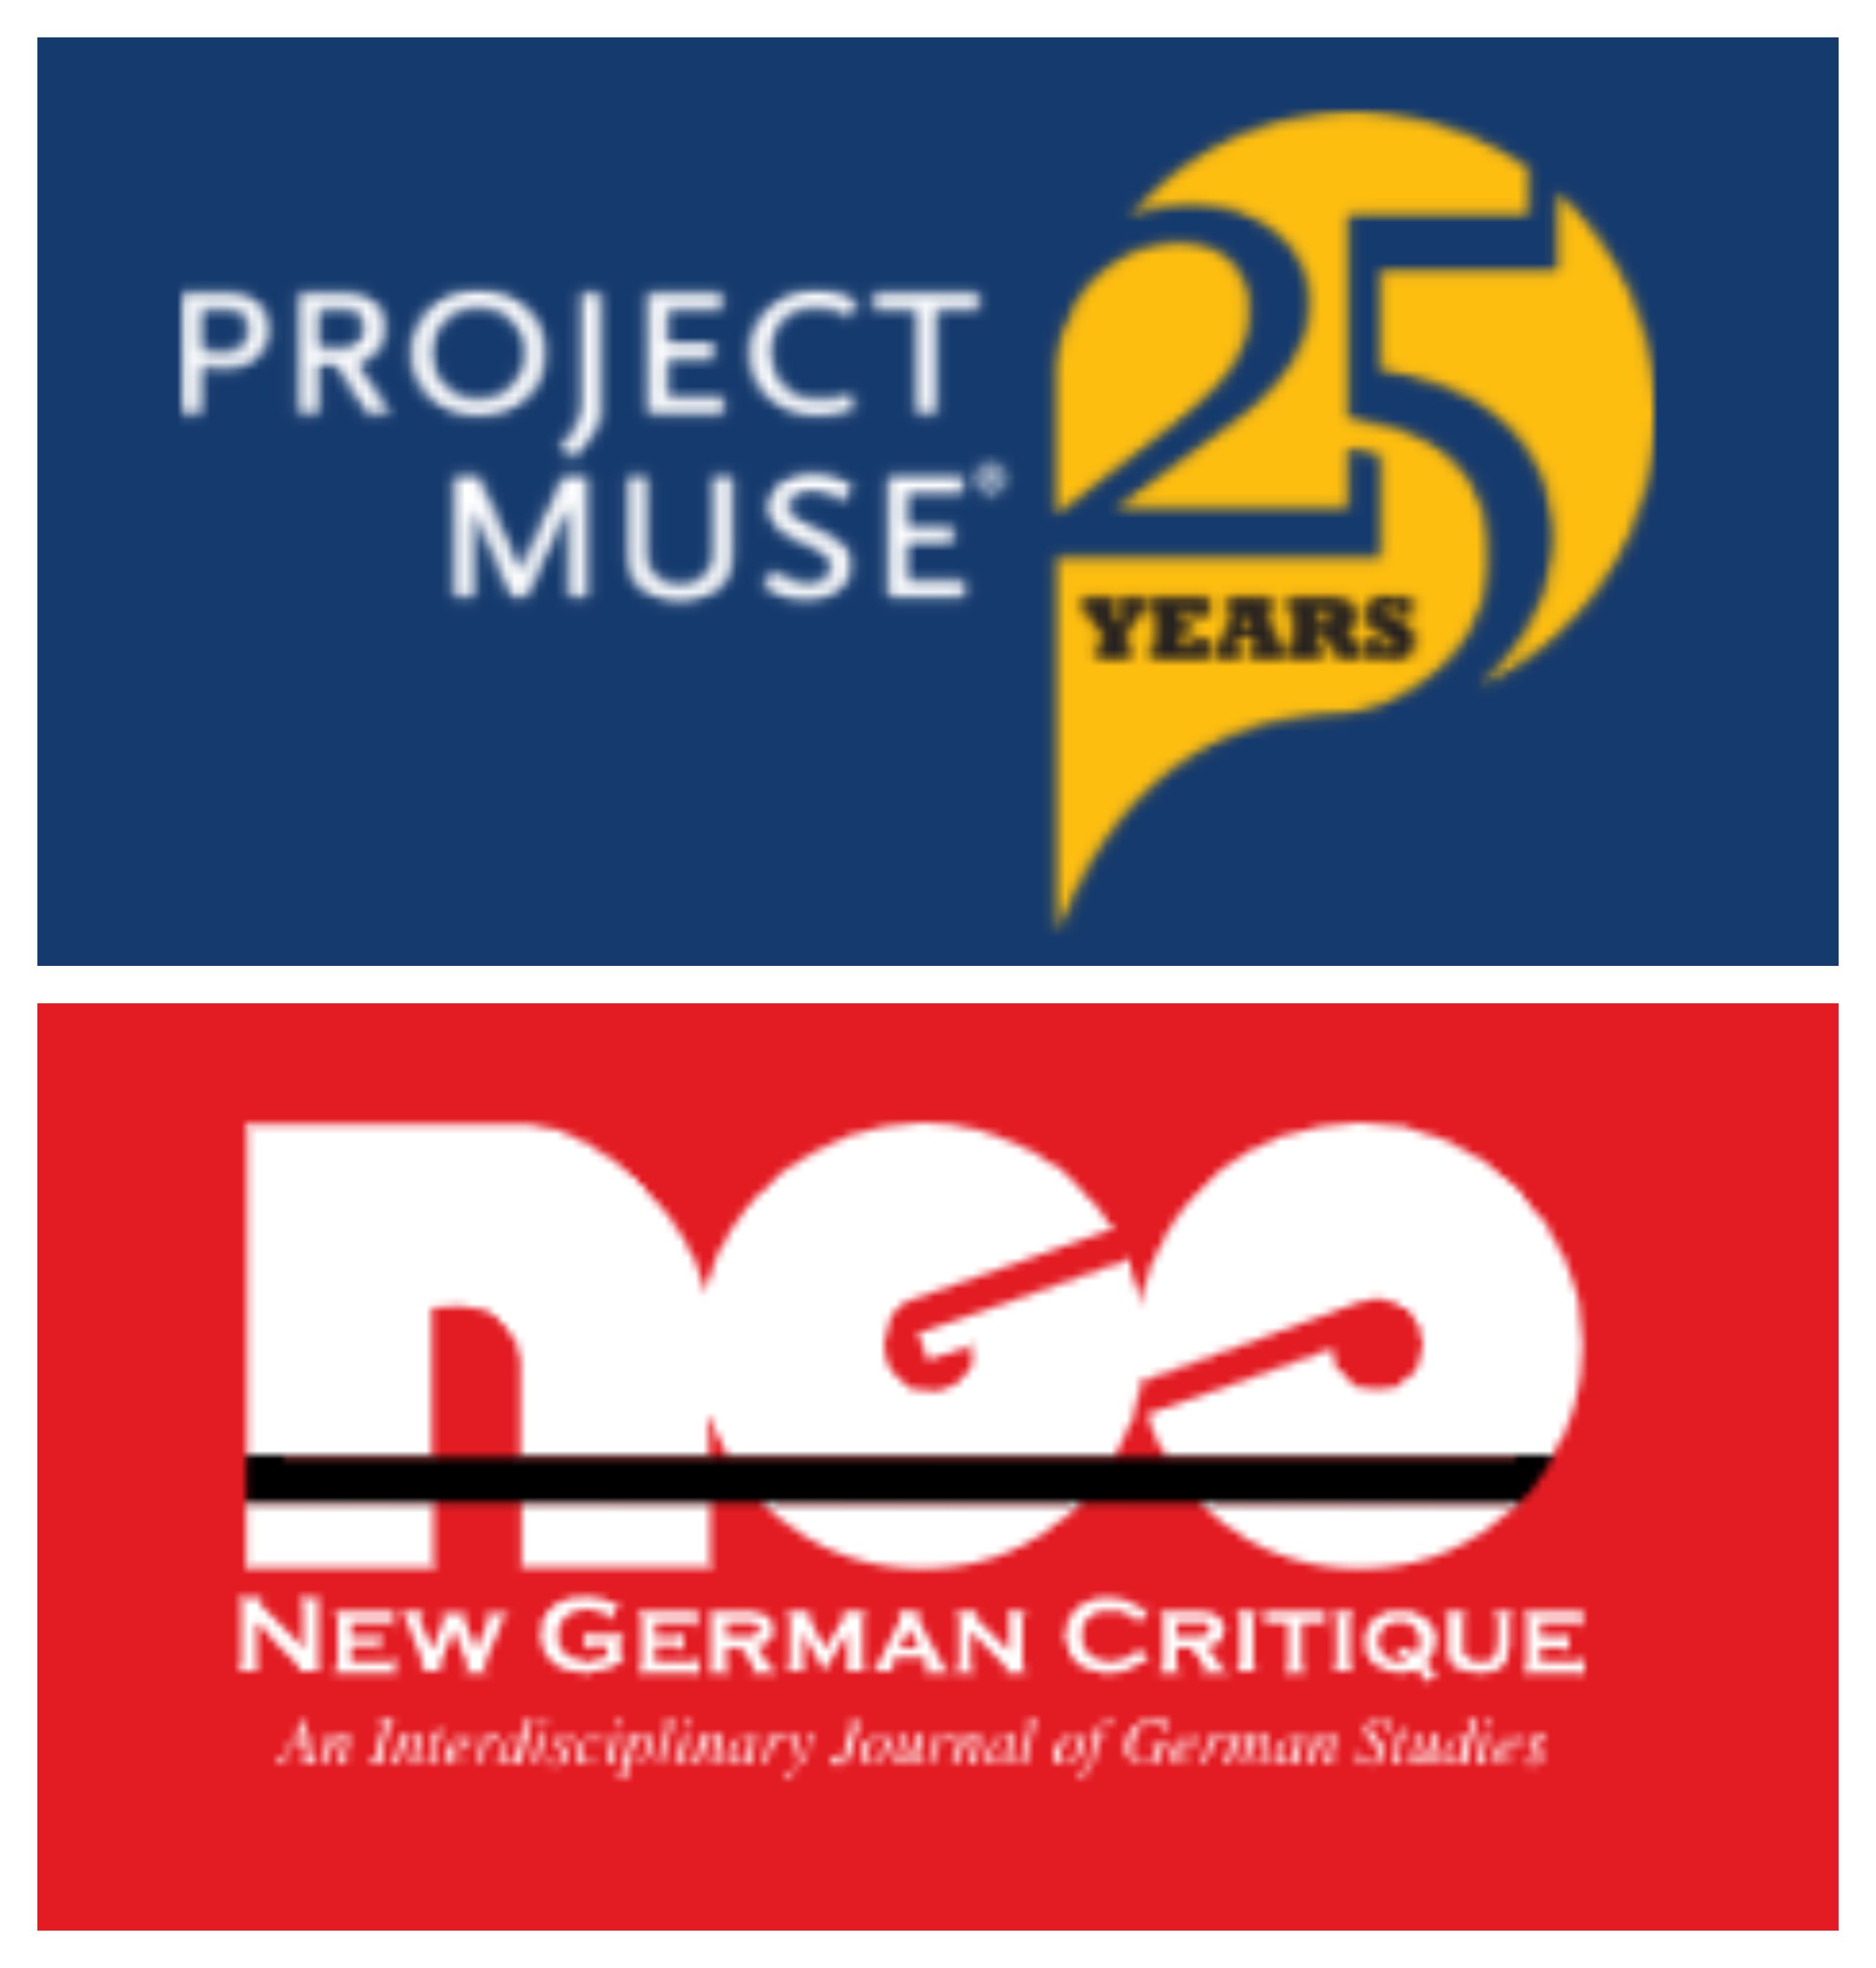 Project Muse and New German Critique logos